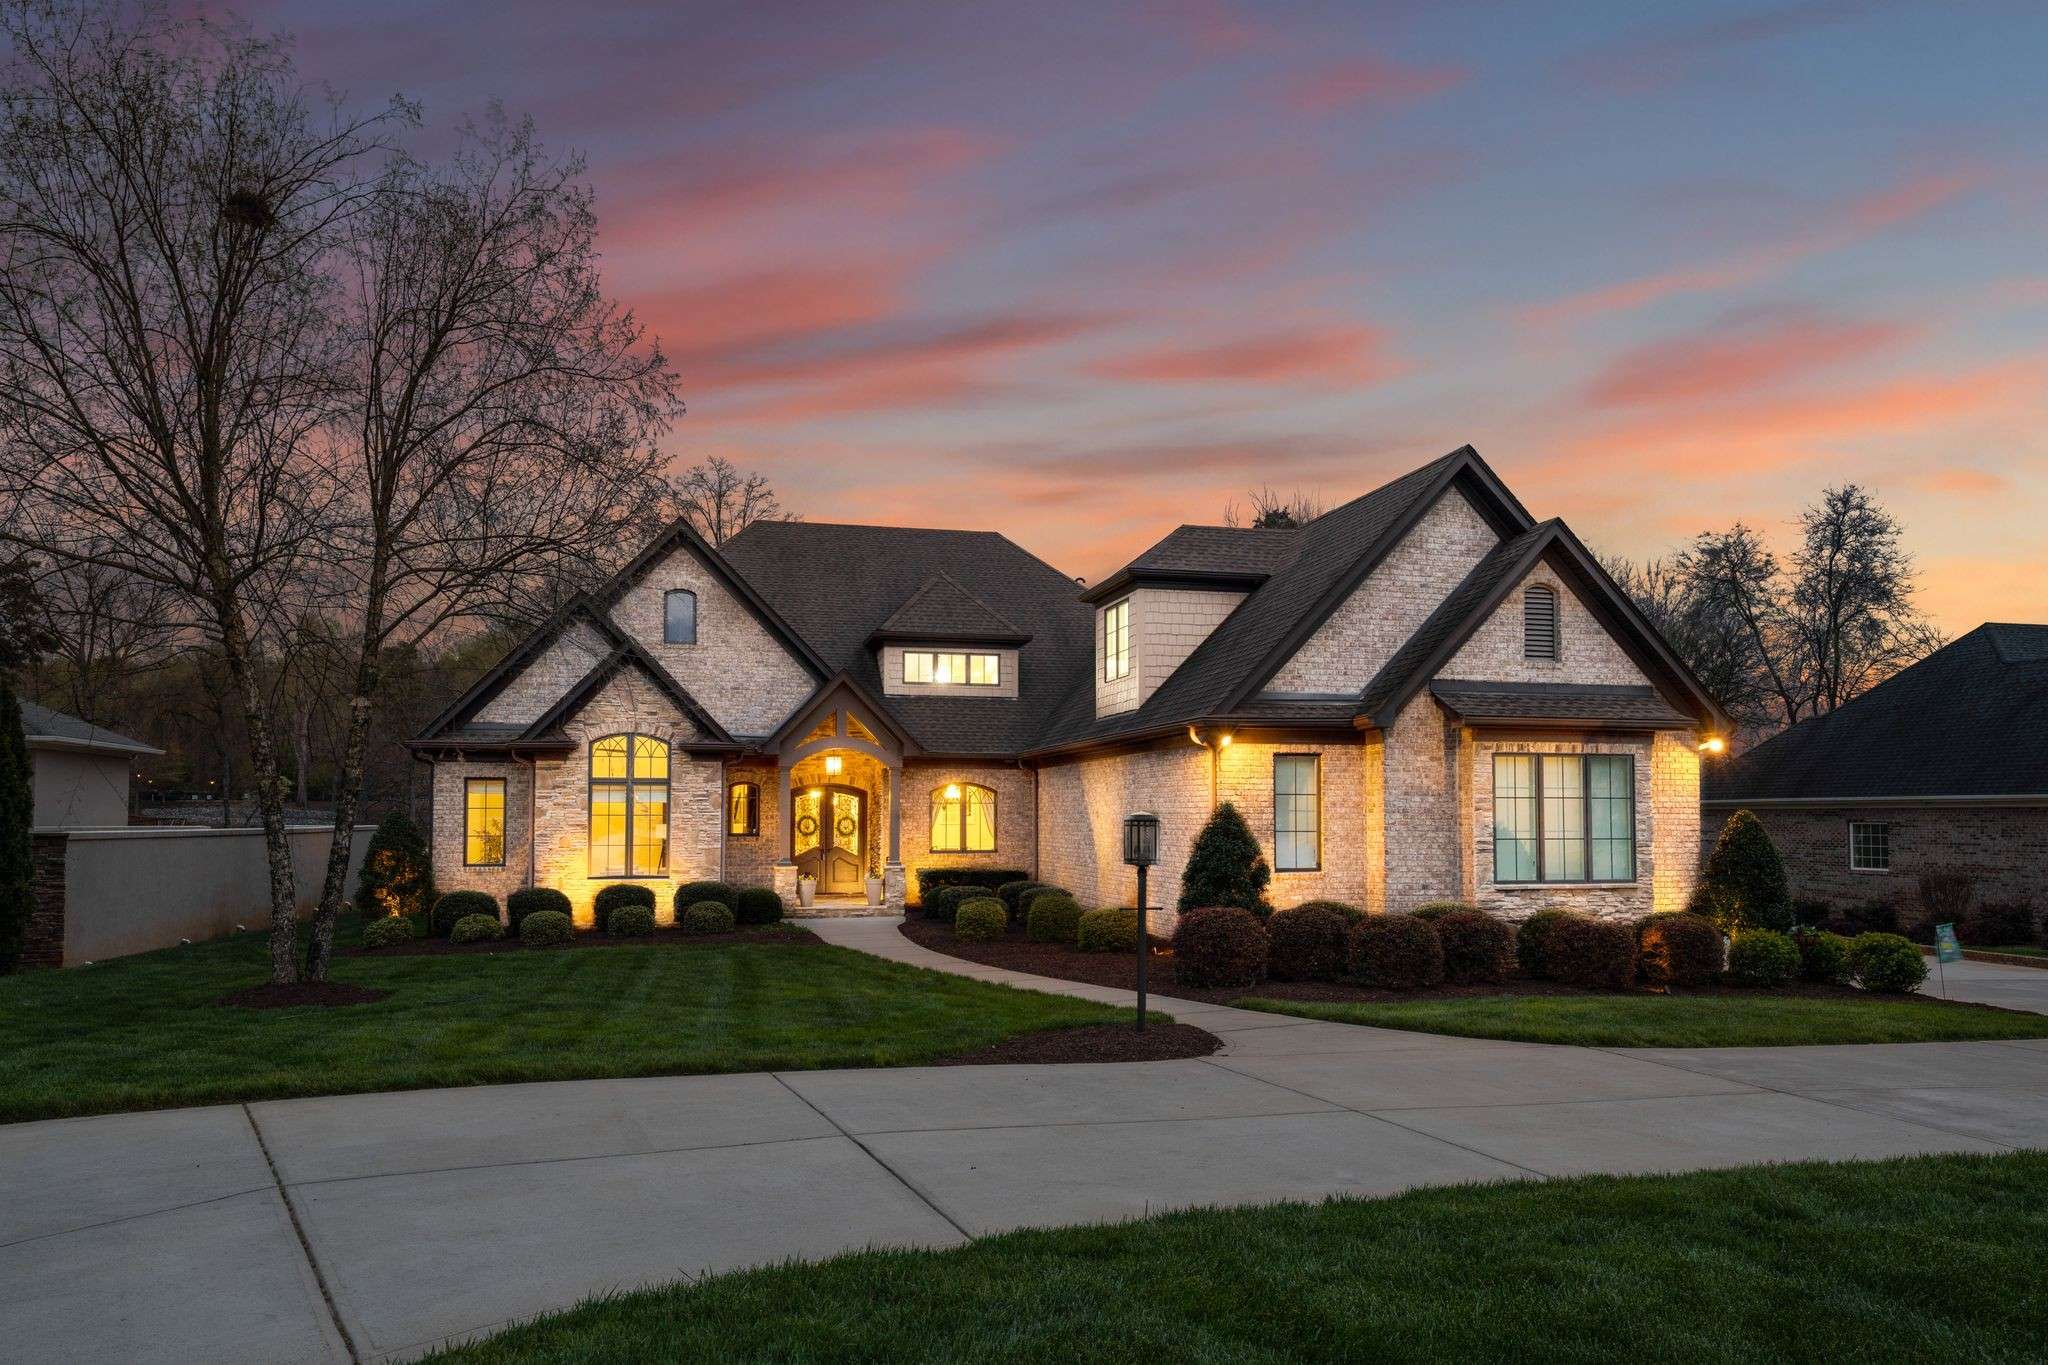 1 of 79. Exterior - Twilight, welcome to 846 Armstrong Rd